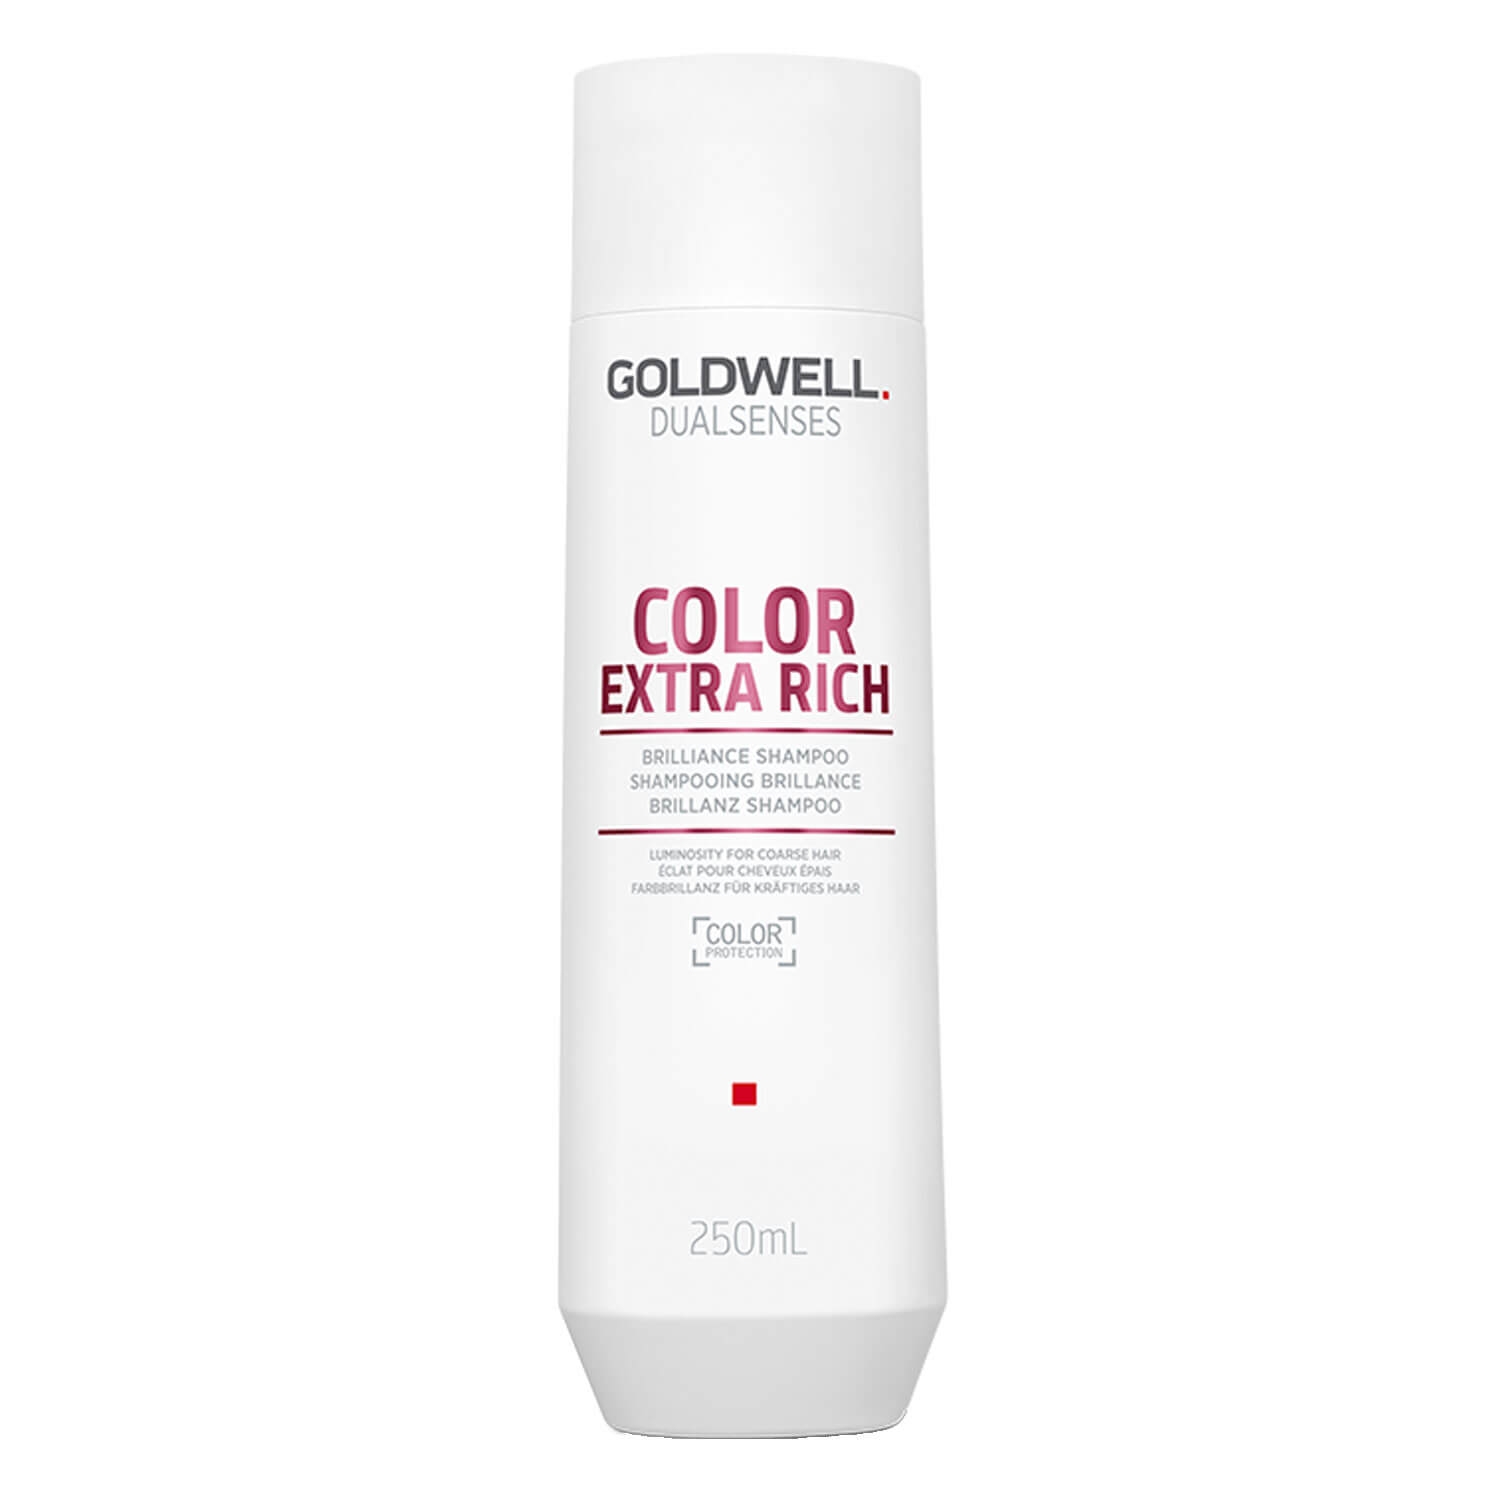 Product image from Dualsenses Color Extra Rich - Brilliance Shampoo